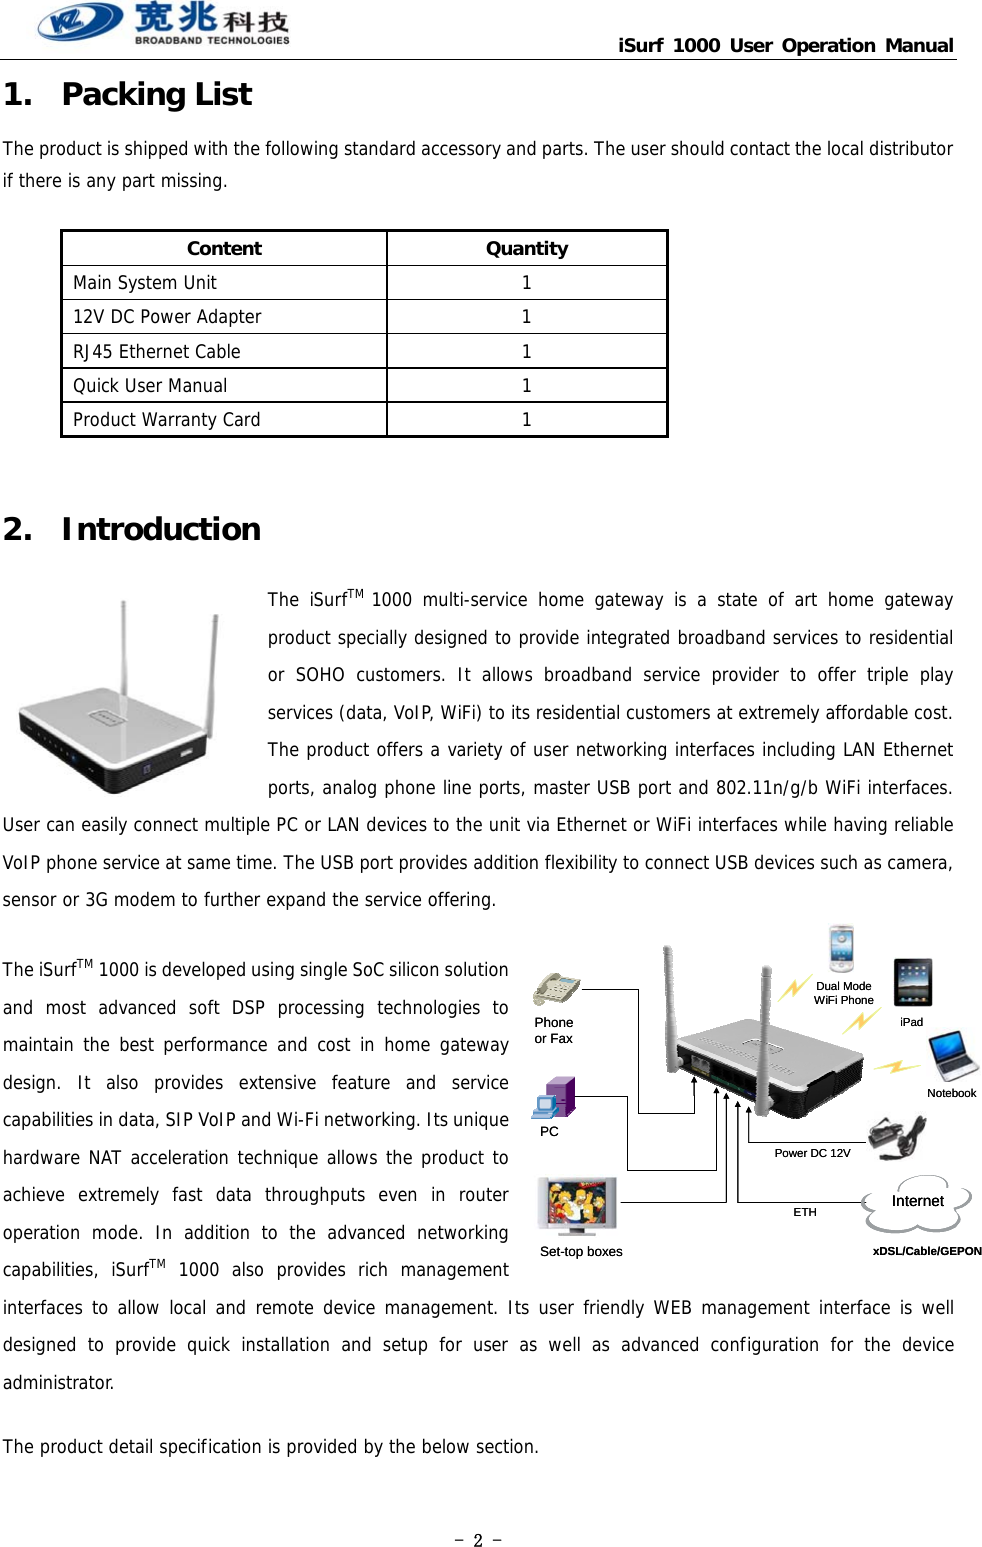                                   iSurf 1000 User Operation Manual - 2 - 1. Packing List The product is shipped with the following standard accessory and parts. The user should contact the local distributor if there is any part missing.   Content Quantity Main System Unit  1 12V DC Power Adapter  1 RJ45 Ethernet Cable  1 Quick User Manual  1 Product Warranty Card  1  2. Introduction The iSurfTM  1000 multi-service home gateway is a state of art home gateway product specially designed to provide integrated broadband services to residential or SOHO customers. It allows broadband service provider to offer triple play services (data, VoIP, WiFi) to its residential customers at extremely affordable cost. The product offers a variety of user networking interfaces including LAN Ethernet ports, analog phone line ports, master USB port and 802.11n/g/b WiFi interfaces. User can easily connect multiple PC or LAN devices to the unit via Ethernet or WiFi interfaces while having reliable VoIP phone service at same time. The USB port provides addition flexibility to connect USB devices such as camera, sensor or 3G modem to further expand the service offering. The iSurfTM 1000 is developed using single SoC silicon solution and most advanced soft DSP processing technologies to maintain the best performance and cost in home gateway design. It also provides extensive feature and service capabilities in data, SIP VoIP and Wi-Fi networking. Its unique hardware NAT acceleration technique allows the product to achieve extremely fast data throughputs even in router operation mode. In addition to the advanced networking capabilities, iSurfTM 1000 also provides rich management interfaces to allow local and remote device management. Its user friendly WEB management interface is well designed to provide quick installation and setup for user as well as advanced configuration for the device administrator.   The product detail specification is provided by the below section.    iPadPhone or FaxPCxDSL/Cable/GEPONSet-top boxesNotebookDual ModeWiFi PhonePower DC 12VETHInternetiPadPhone or FaxPCxDSL/Cable/GEPONSet-top boxesNotebookDual ModeWiFi PhonePower DC 12VETHInternetInternet